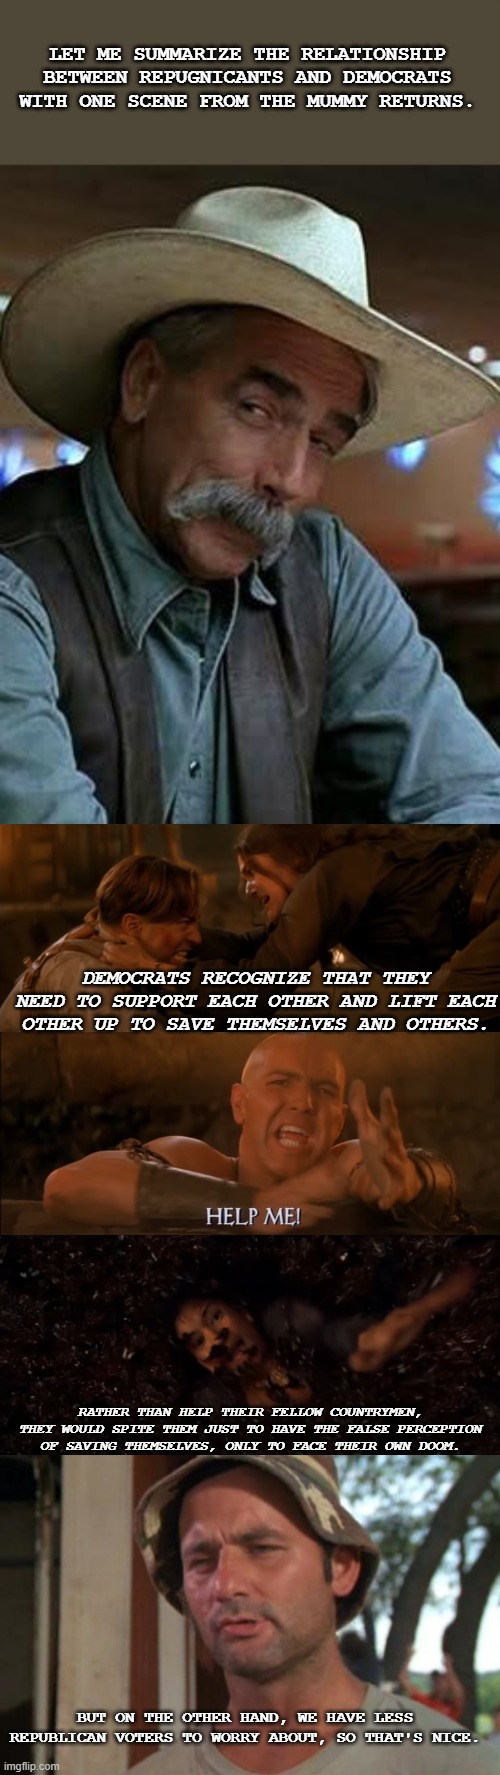 More unvaccinated deaths = more votes for dems. | LET ME SUMMARIZE THE RELATIONSHIP BETWEEN REPUGNICANTS AND DEMOCRATS WITH ONE SCENE FROM THE MUMMY RETURNS. DEMOCRATS RECOGNIZE THAT THEY NEED TO SUPPORT EACH OTHER AND LIFT EACH OTHER UP TO SAVE THEMSELVES AND OTHERS. RATHER THAN HELP THEIR FELLOW COUNTRYMEN, THEY WOULD SPITE THEM JUST TO HAVE THE FALSE PERCEPTION OF SAVING THEMSELVES, ONLY TO FACE THEIR OWN DOOM. BUT ON THE OTHER HAND, WE HAVE LESS REPUBLICAN VOTERS TO WORRY ABOUT, SO THAT'S NICE. | image tagged in sam elliott,blank white template,memes,so i got that goin for me which is nice | made w/ Imgflip meme maker